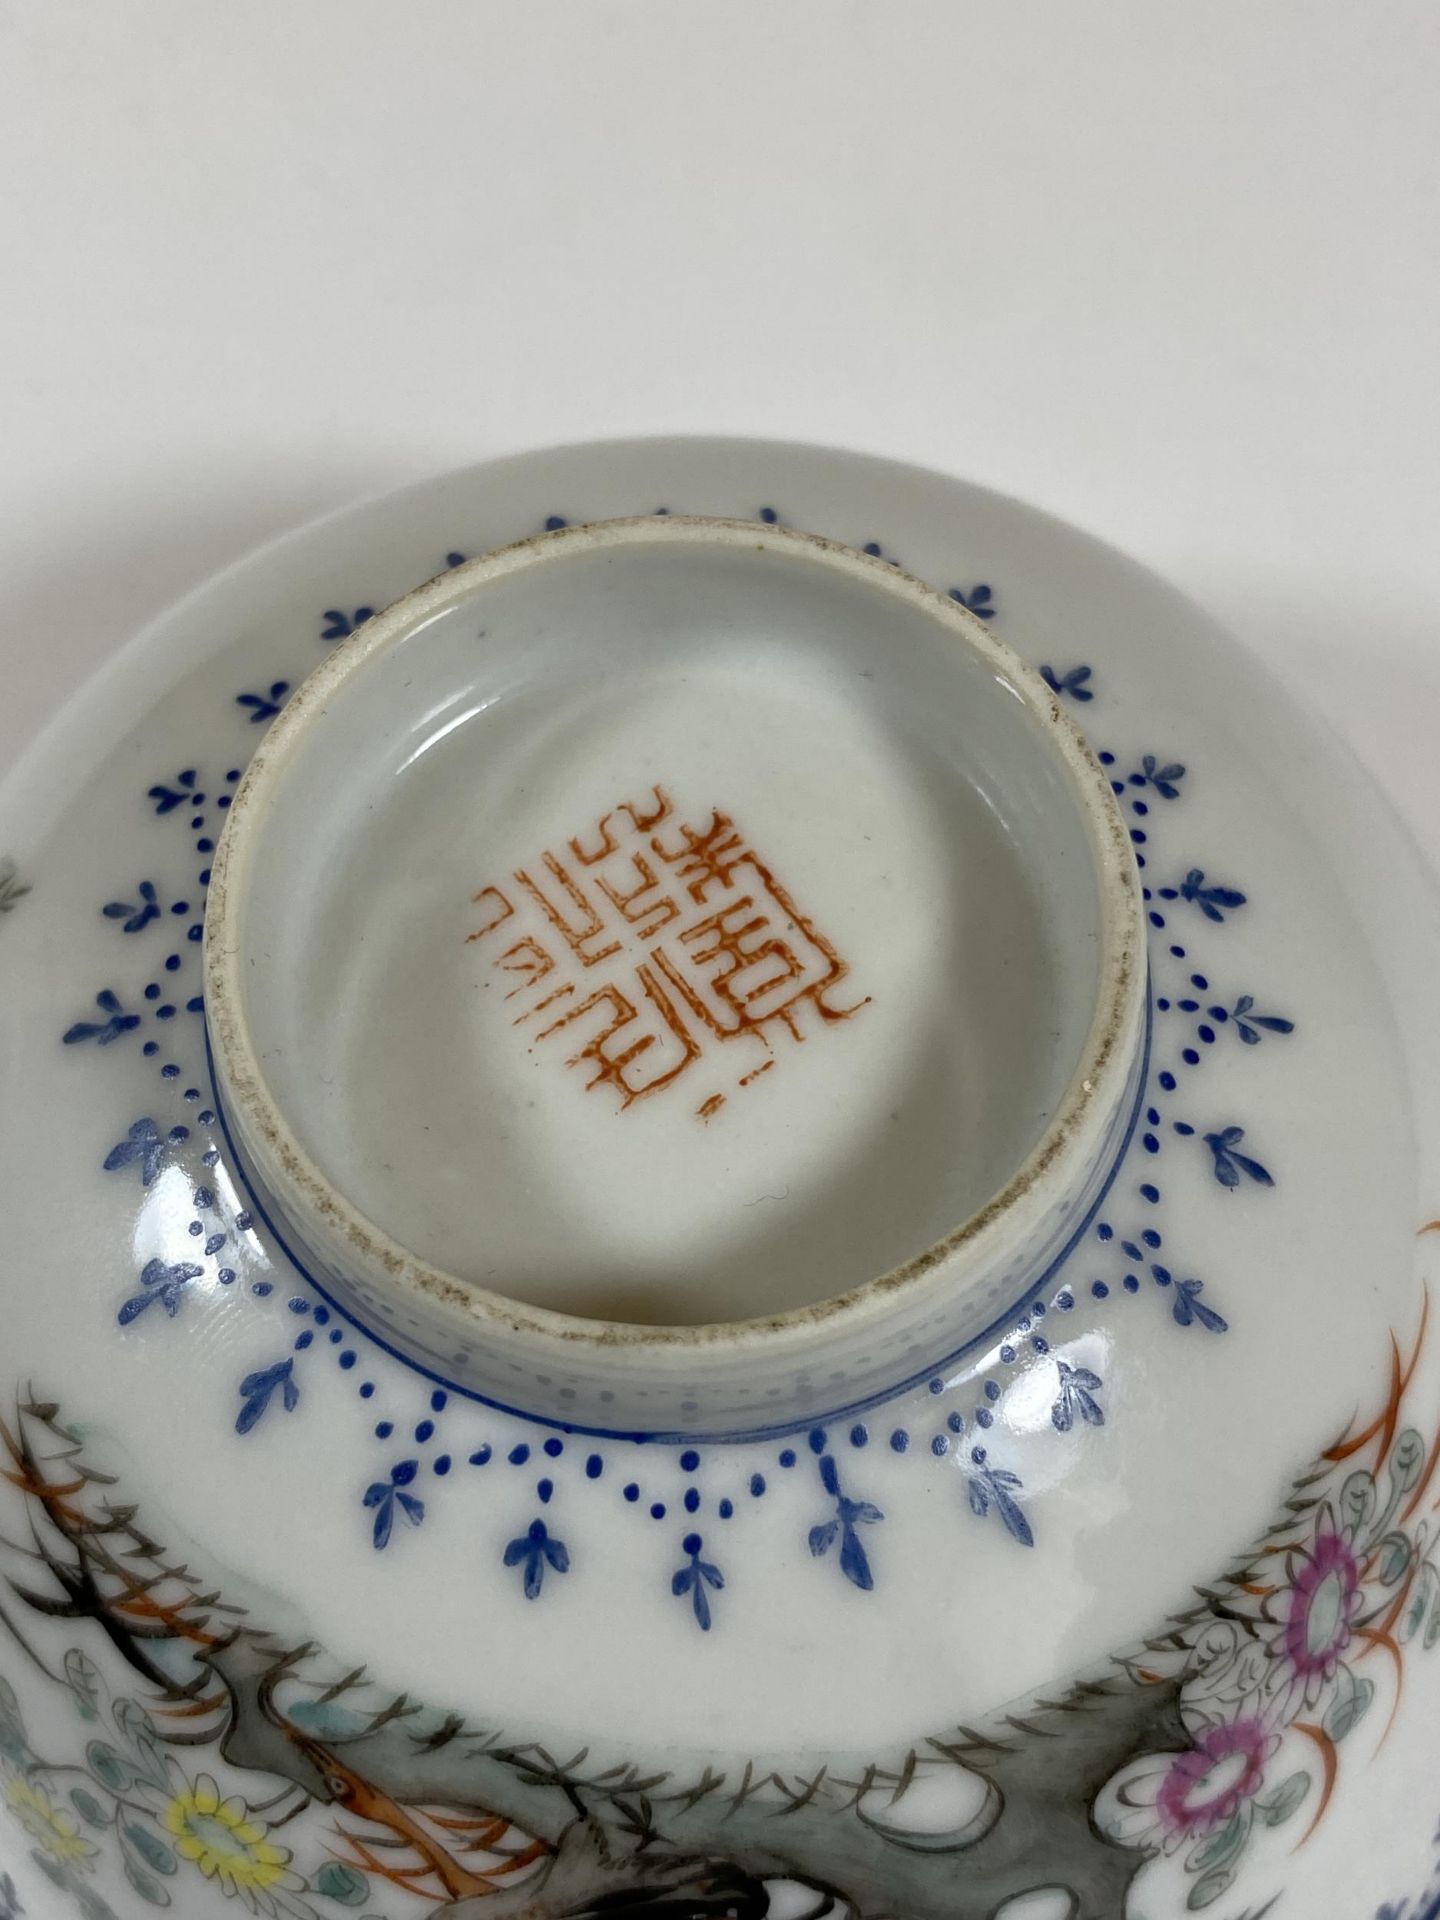 A CHINESE PORCELAIN BOWL WITH BIRD AND FLORAL DESIGN, QIANLONG SEAL MARK TO BASE, DIAMETER 12.5CM - Image 5 of 6